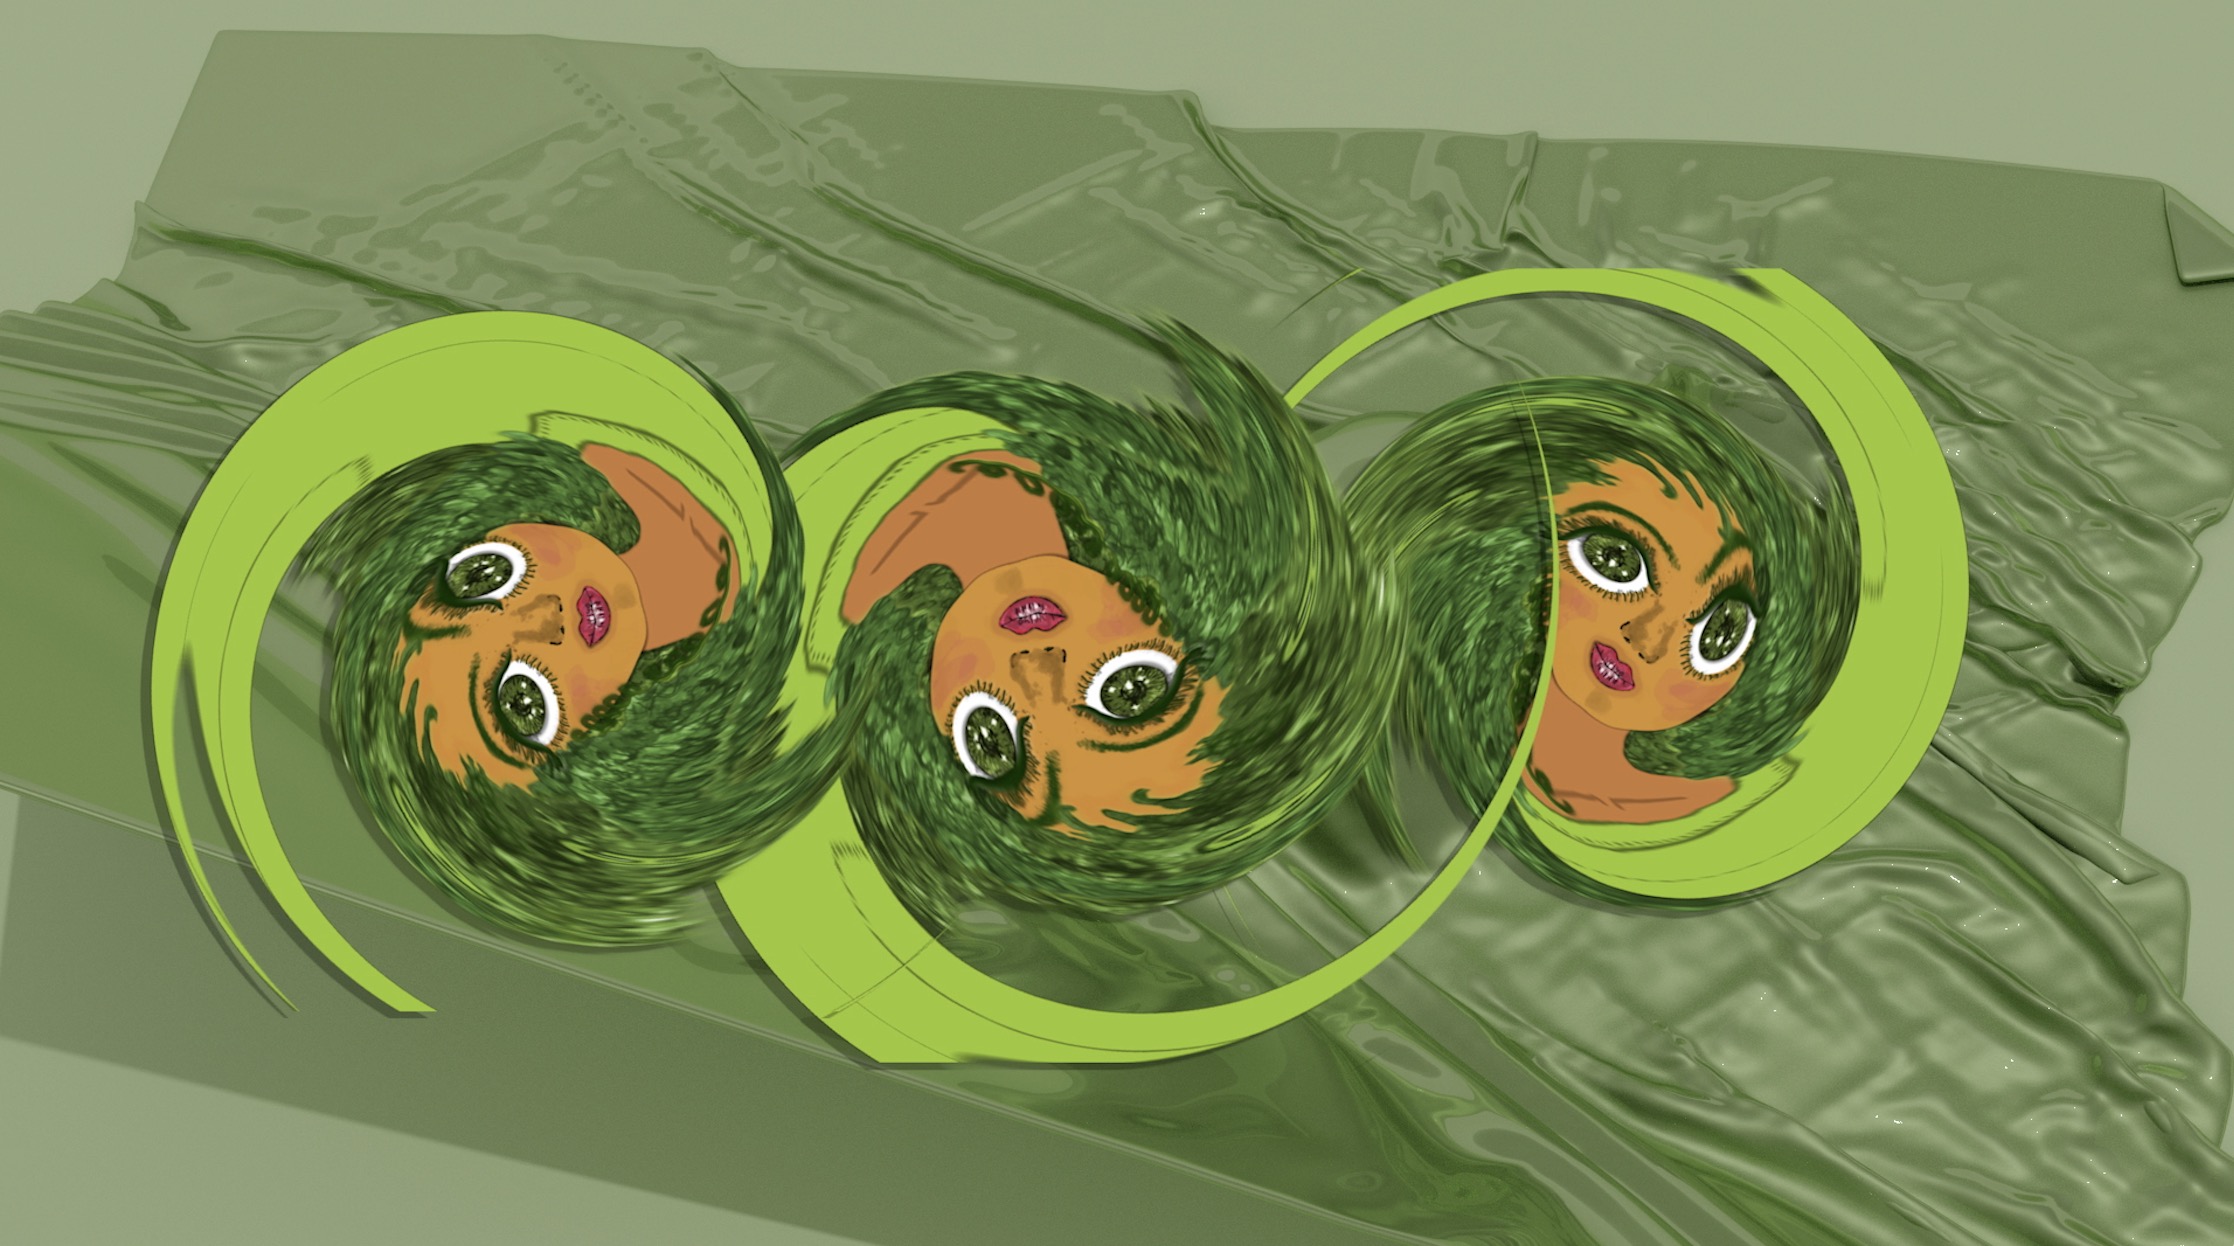 hiba ali, in the cyclone (rough as silk). Three green curly haired beings, with brown skin and tan highlights, big green eyes, round nose, pink lips, are swirling in three separate spirals on top of a shiny green silk fabric with ripples in the background.